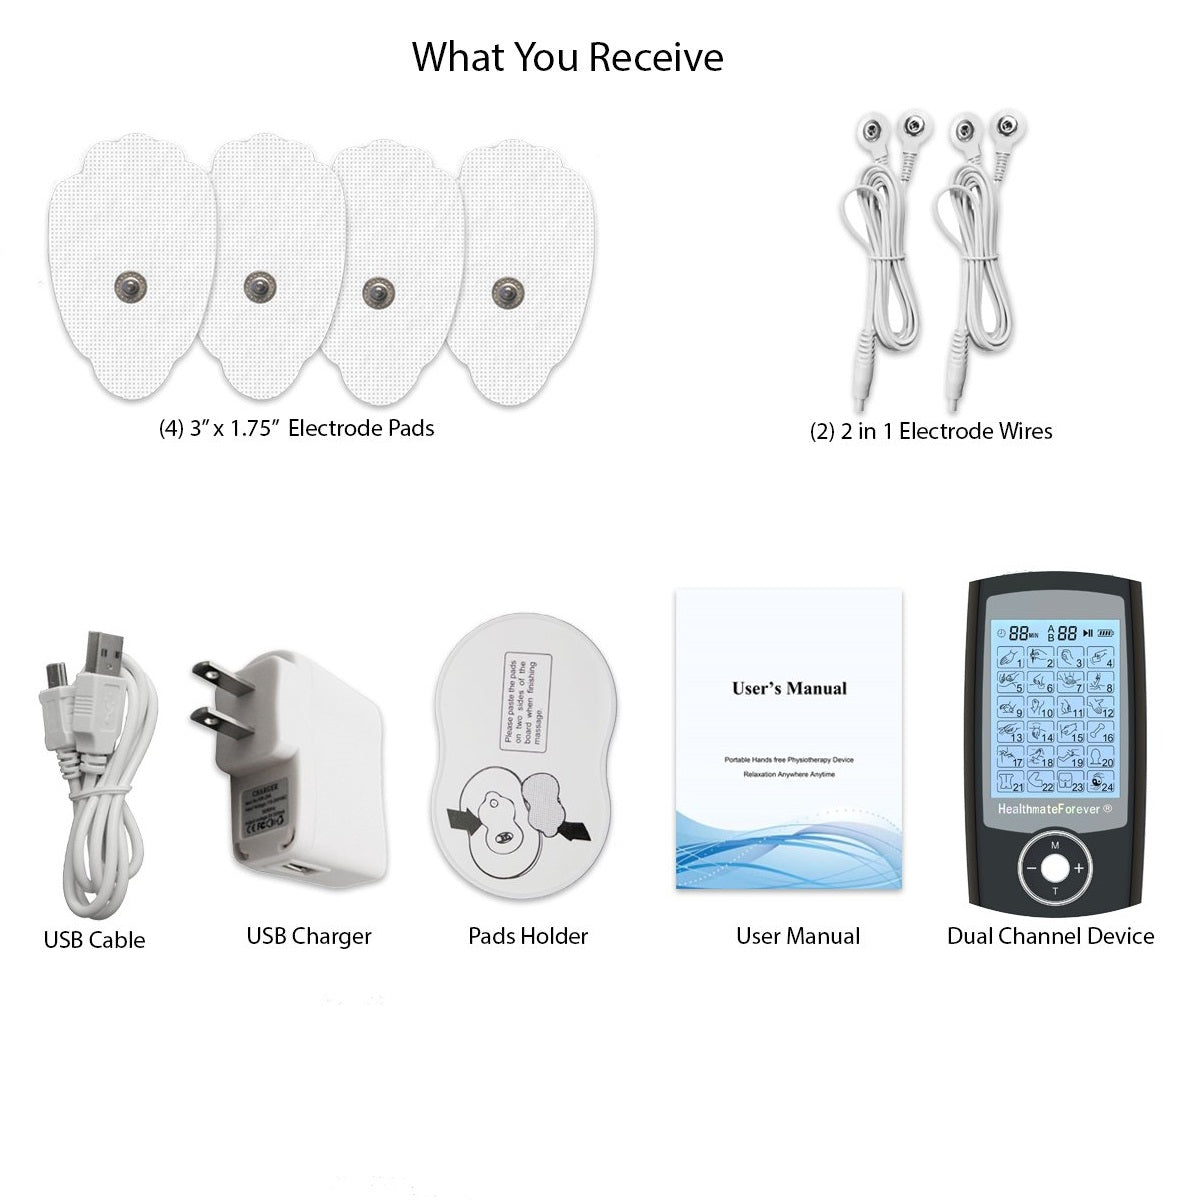 Rechargeable Tens Unit With 24 Modes And 8 Electrode Pads - Dual